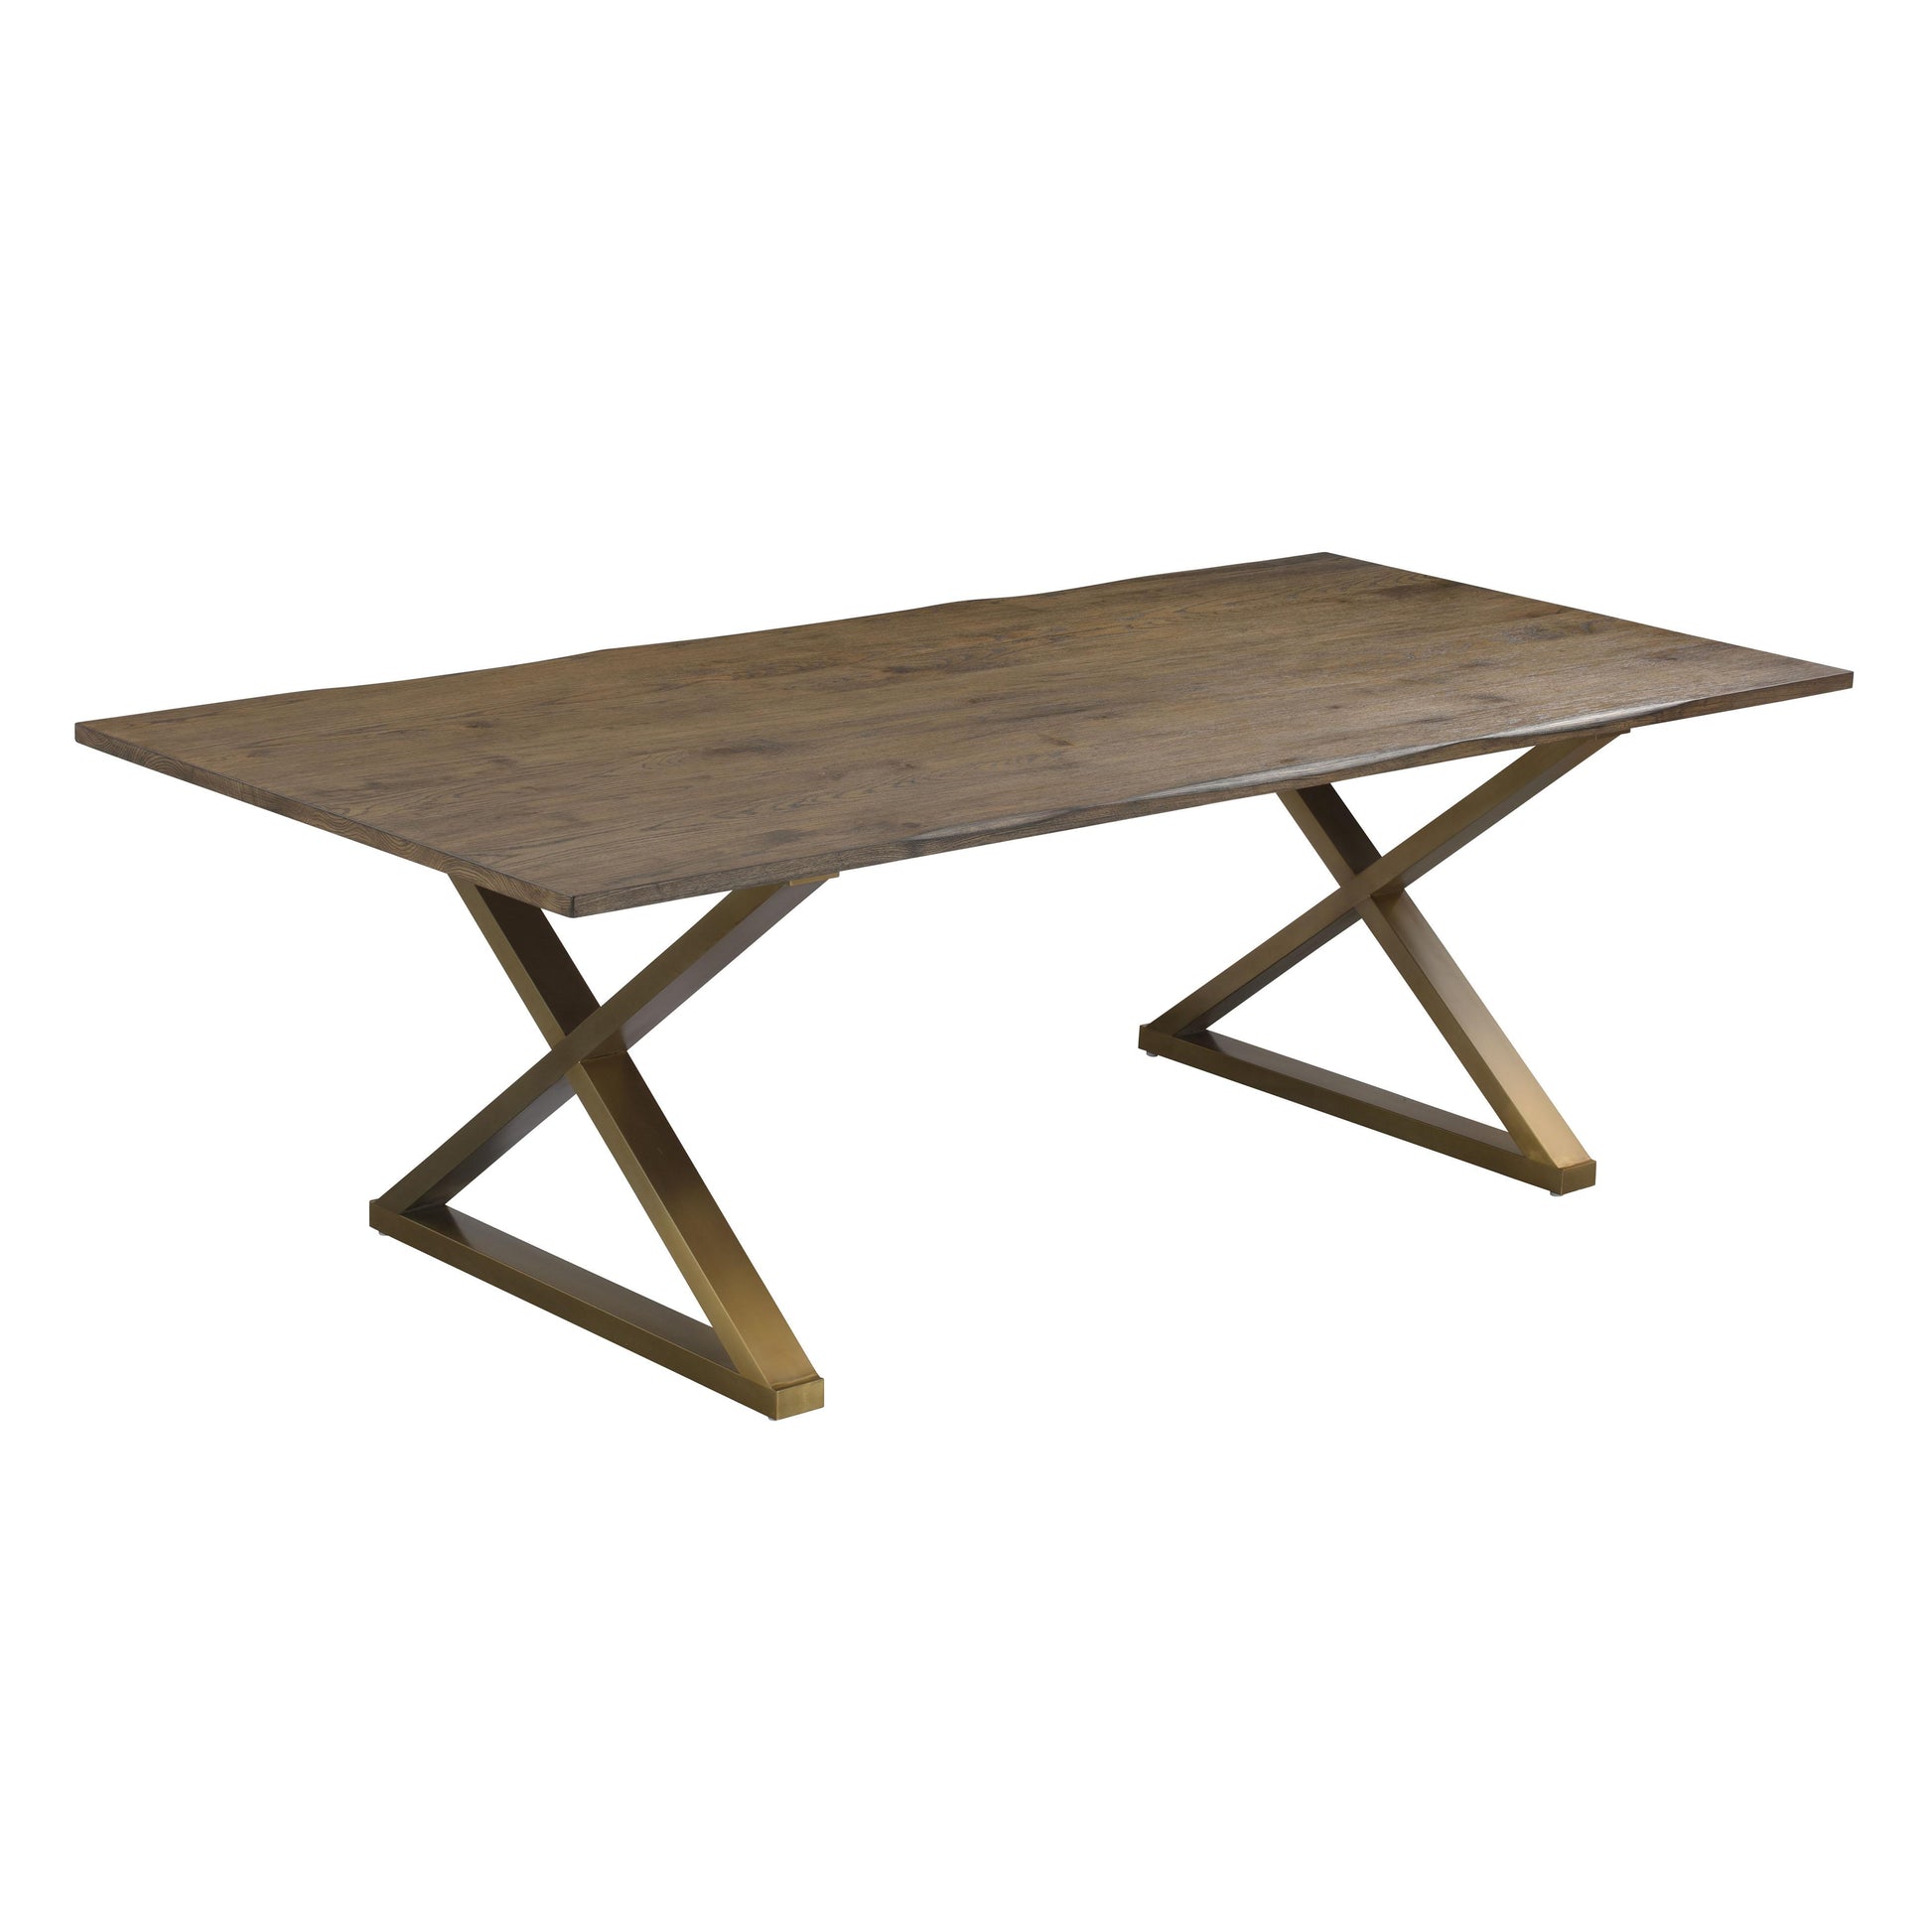 Tov Furniture Leah Dining Table